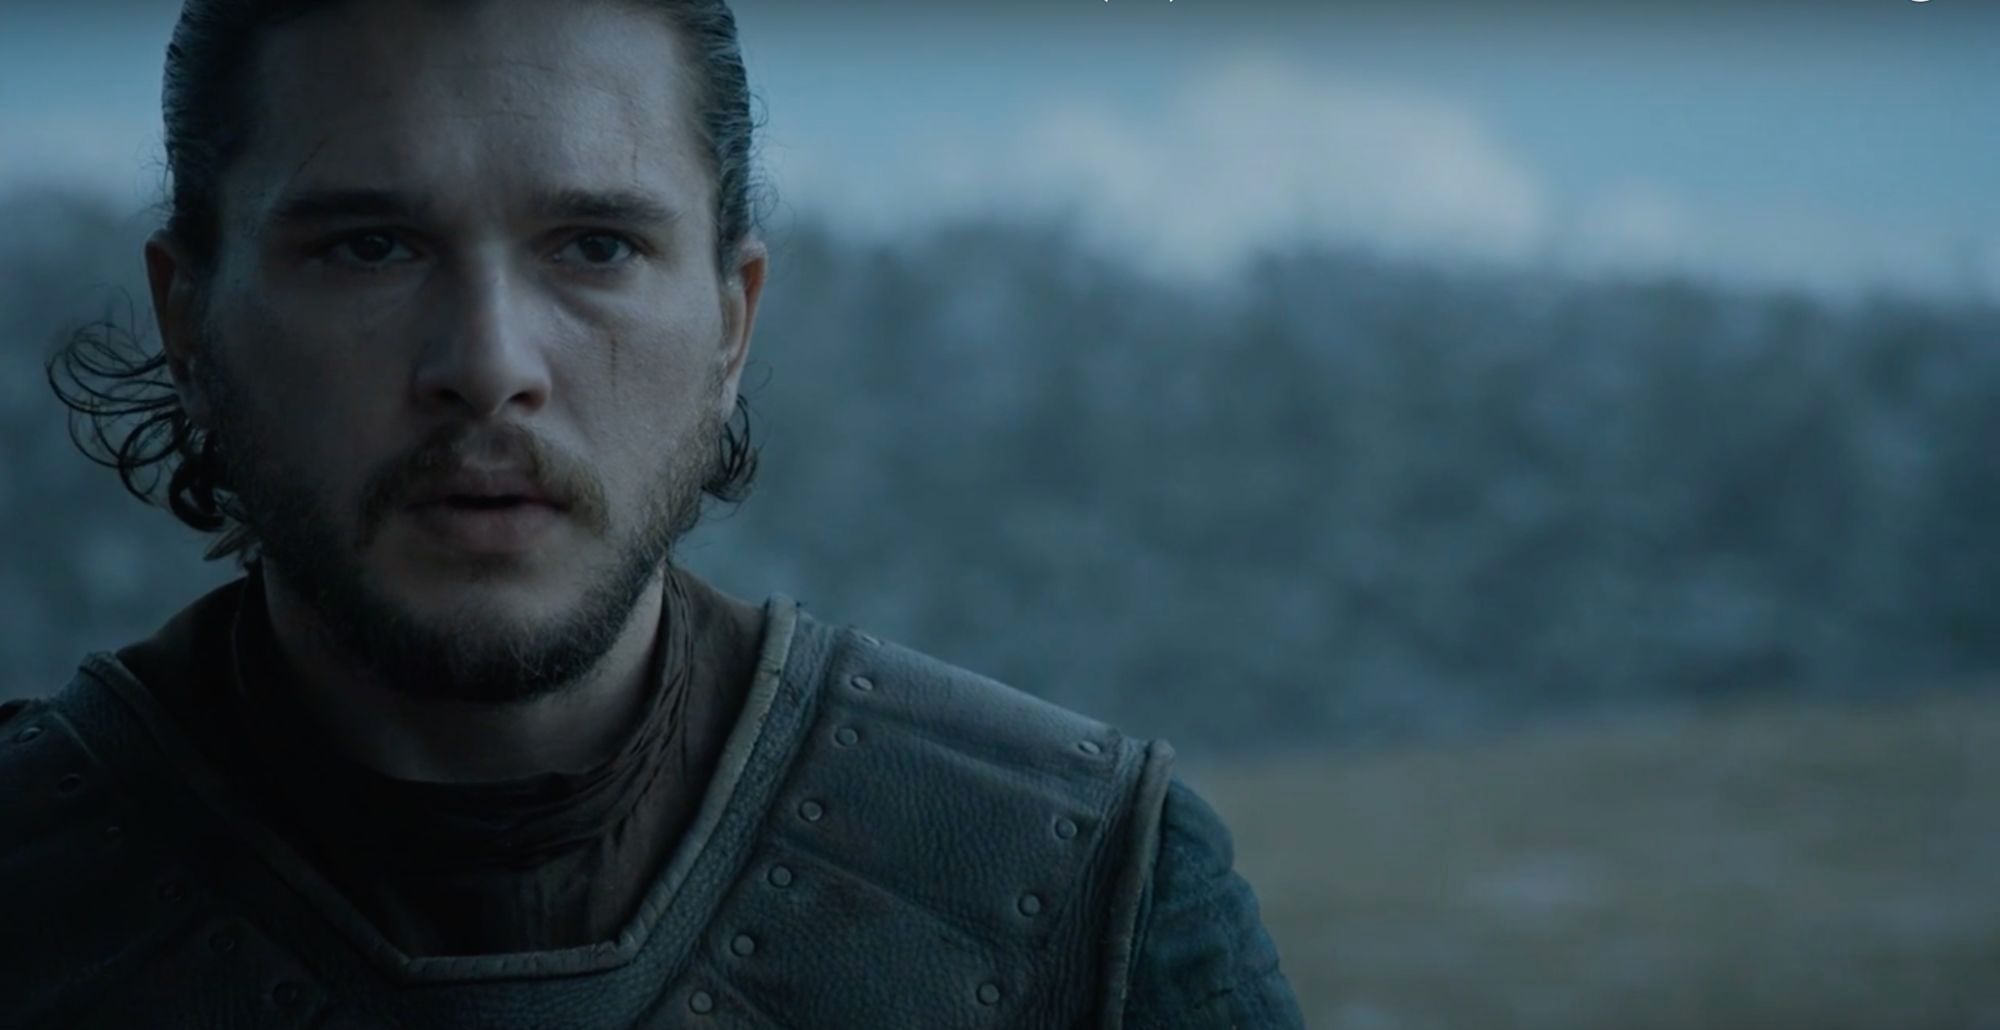 Game of Thrones: Battle of the Bastards Trailer - Jon Snow Outnumbered